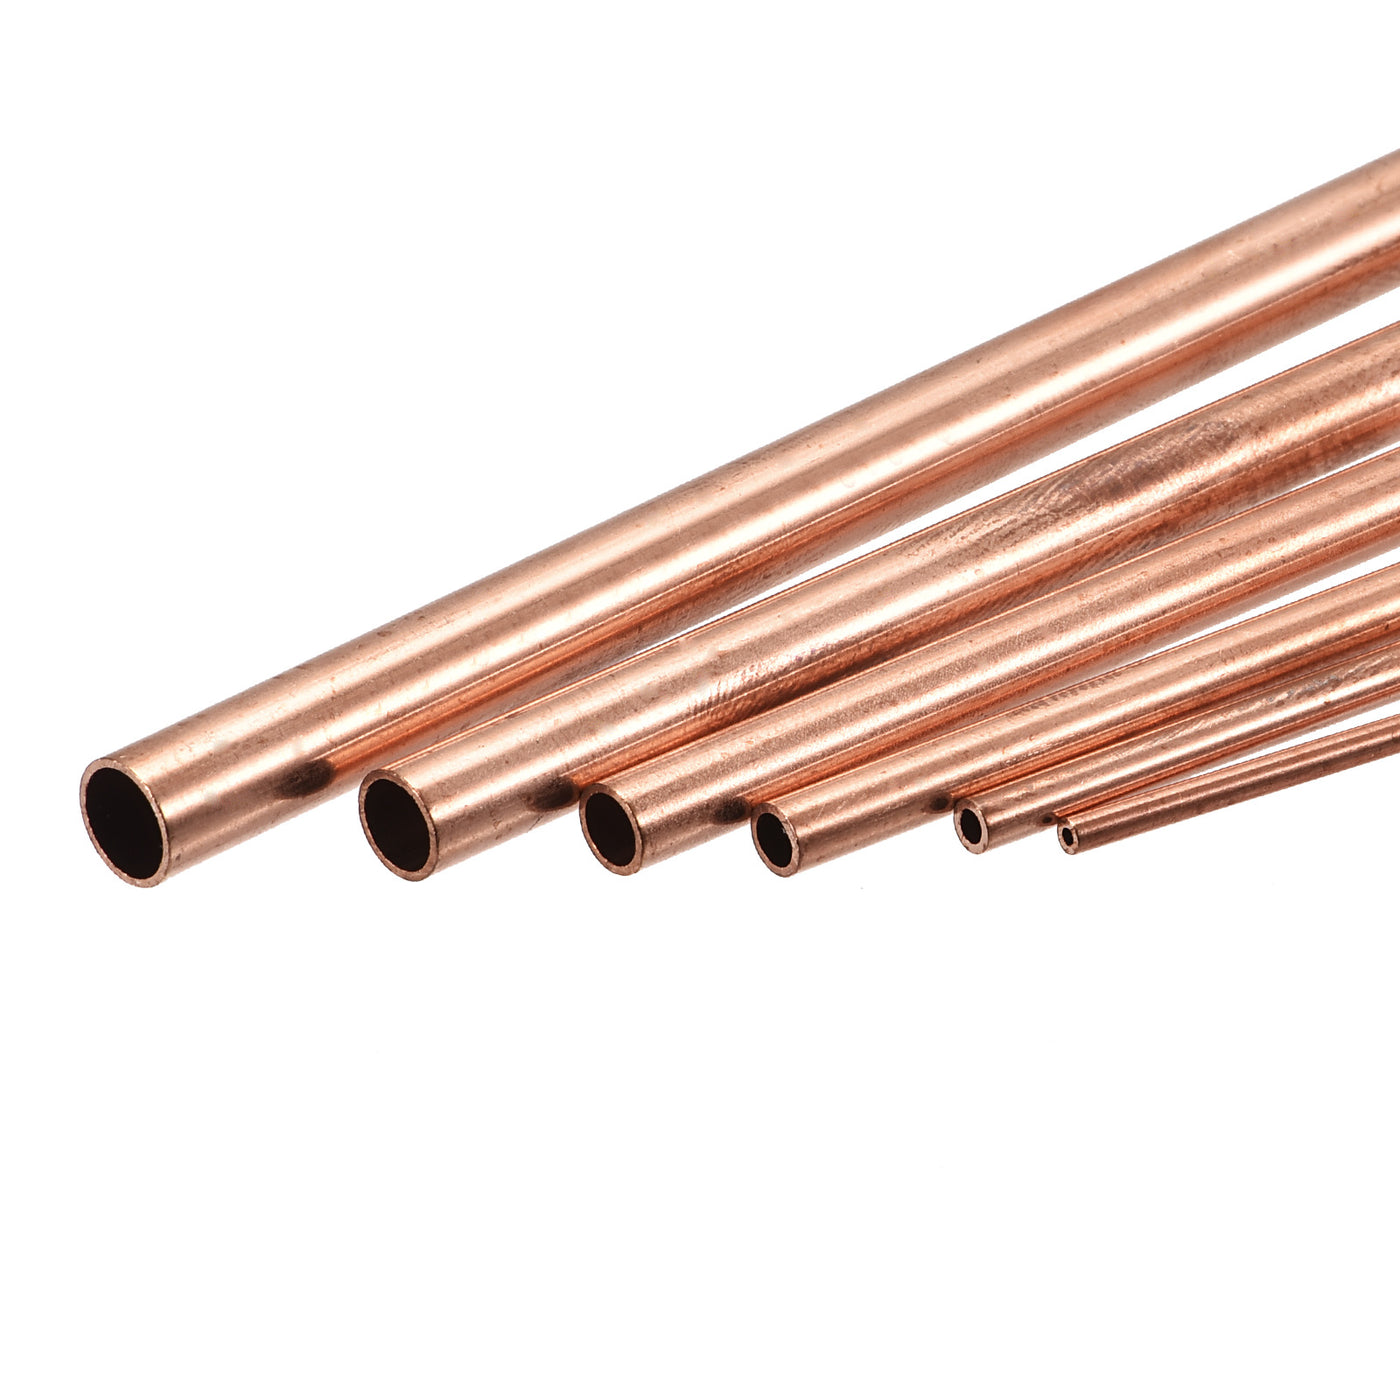 uxcell Uxcell Copper Tube, 8mm 9mm 10mm 11mm 12mm 13mm OD x 0.5mm Wall Thickness 200mm Length Metal Tubing, Pack of 6